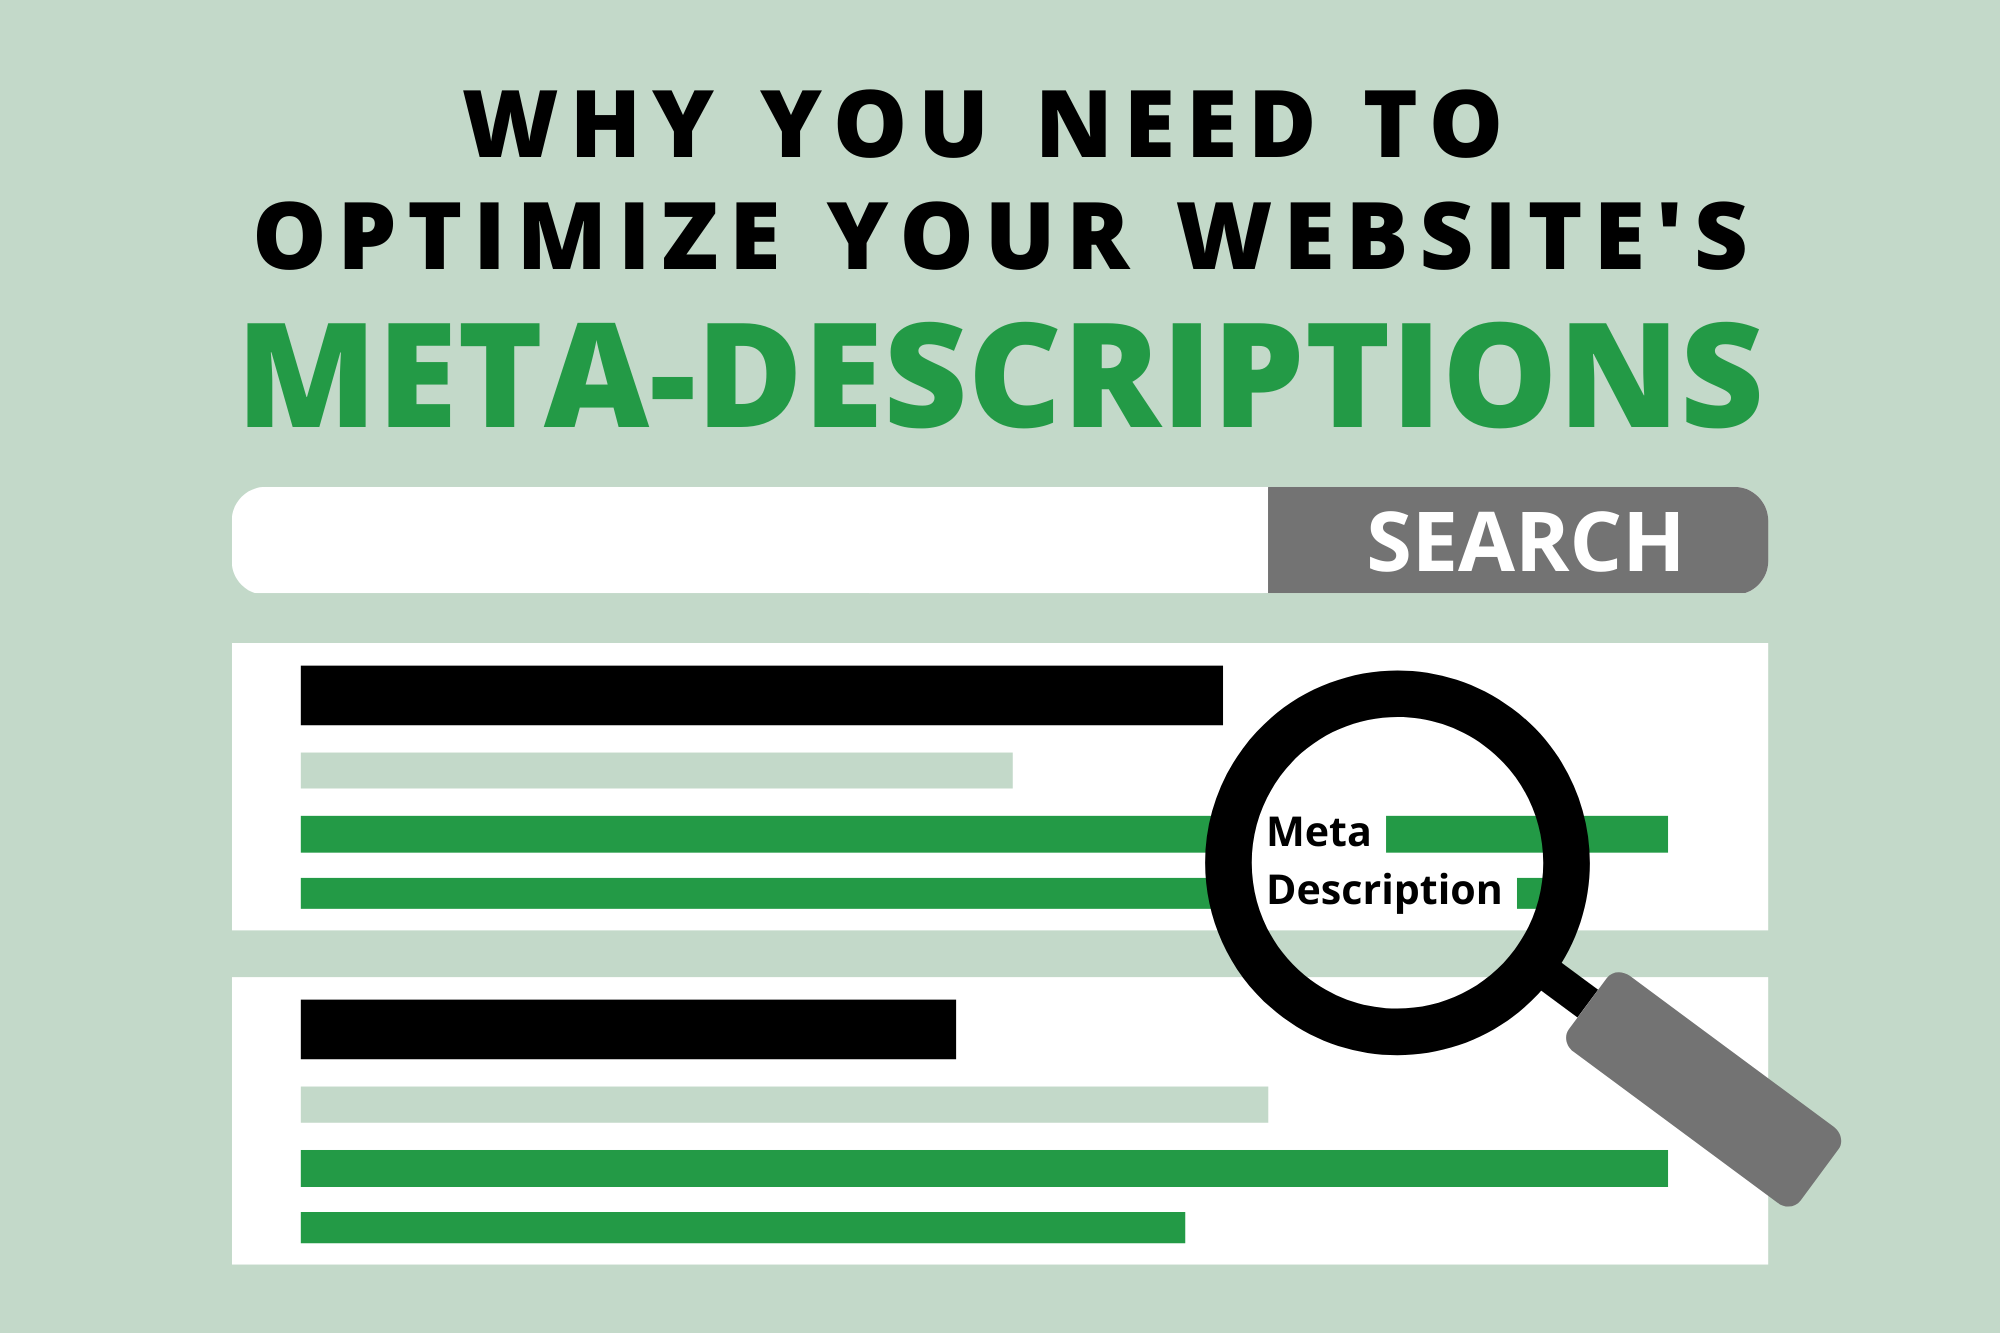 Why You Need to Optimize Your Website Meta-Descriptions